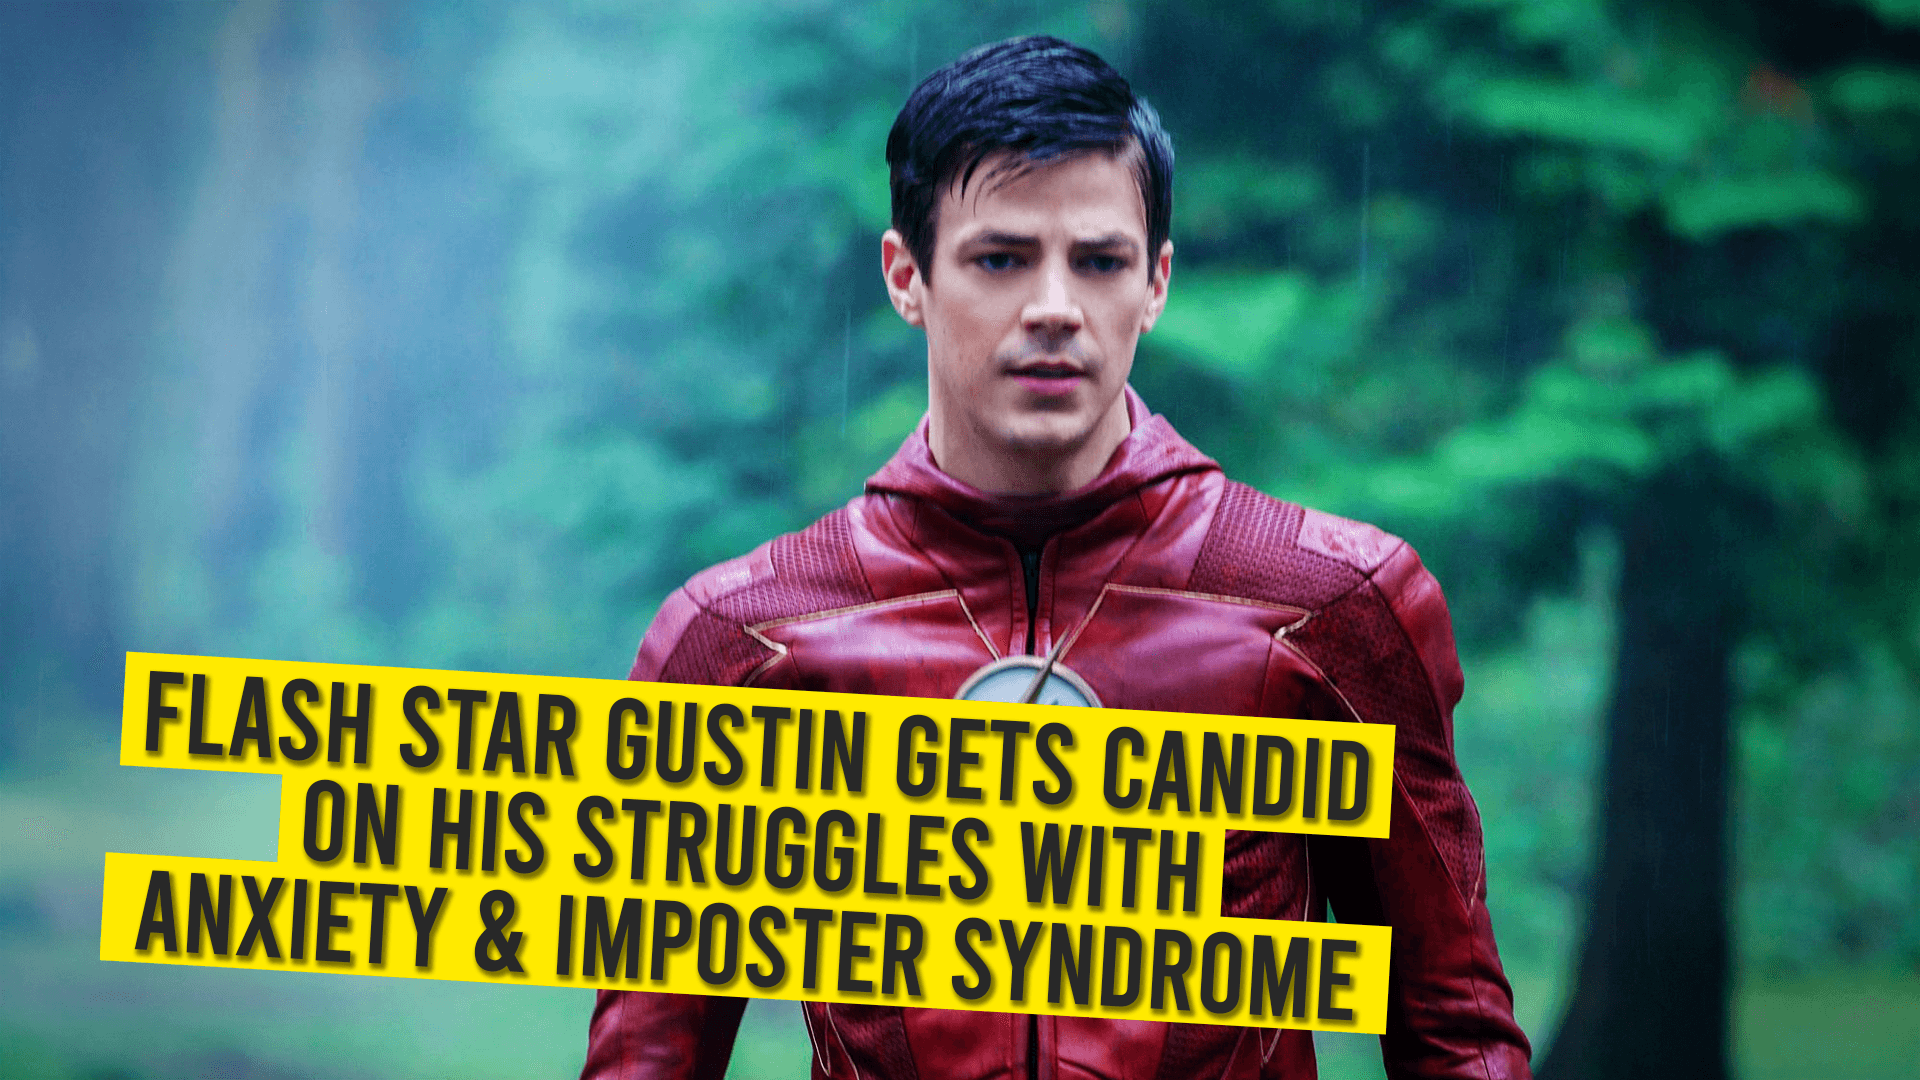 Flash Star Gustin gets Candid on His Struggles with Anxiety & Imposter Syndrome